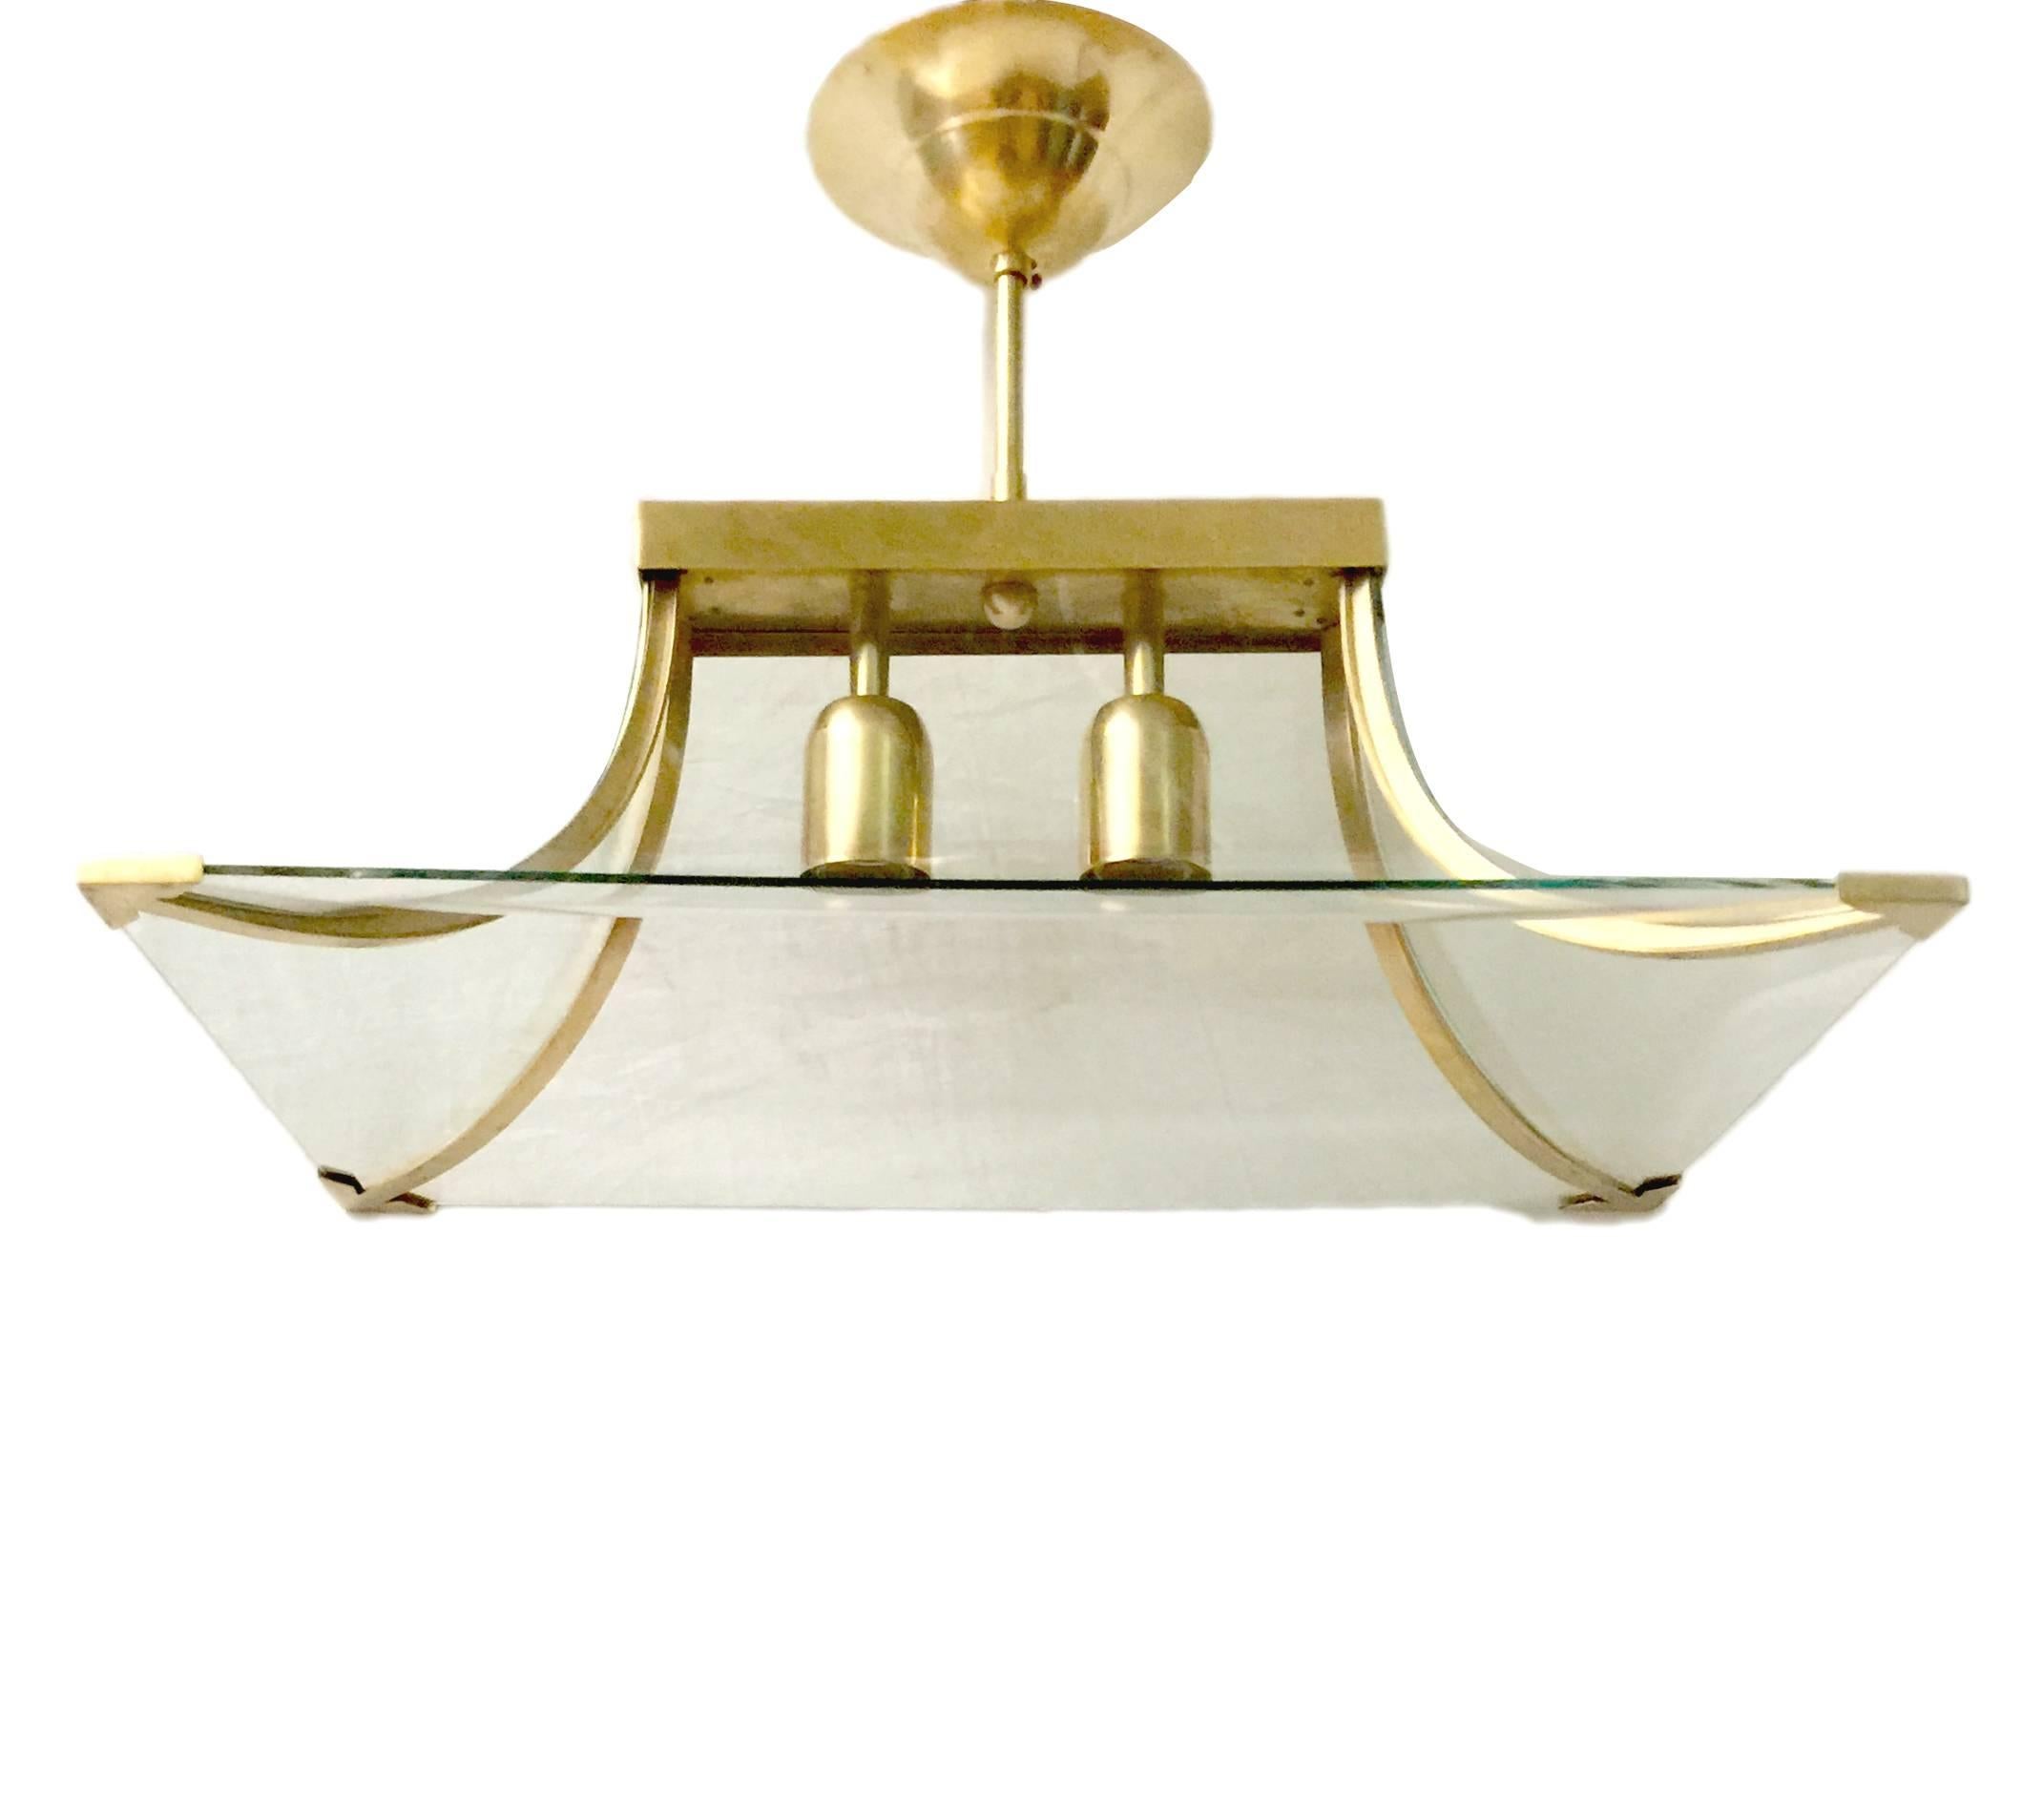 Circa 1960's Italian stylised pagoda-shaped Italian glass and brass pendant light fixture with two interior lights. 

Measurements:
Height: 13